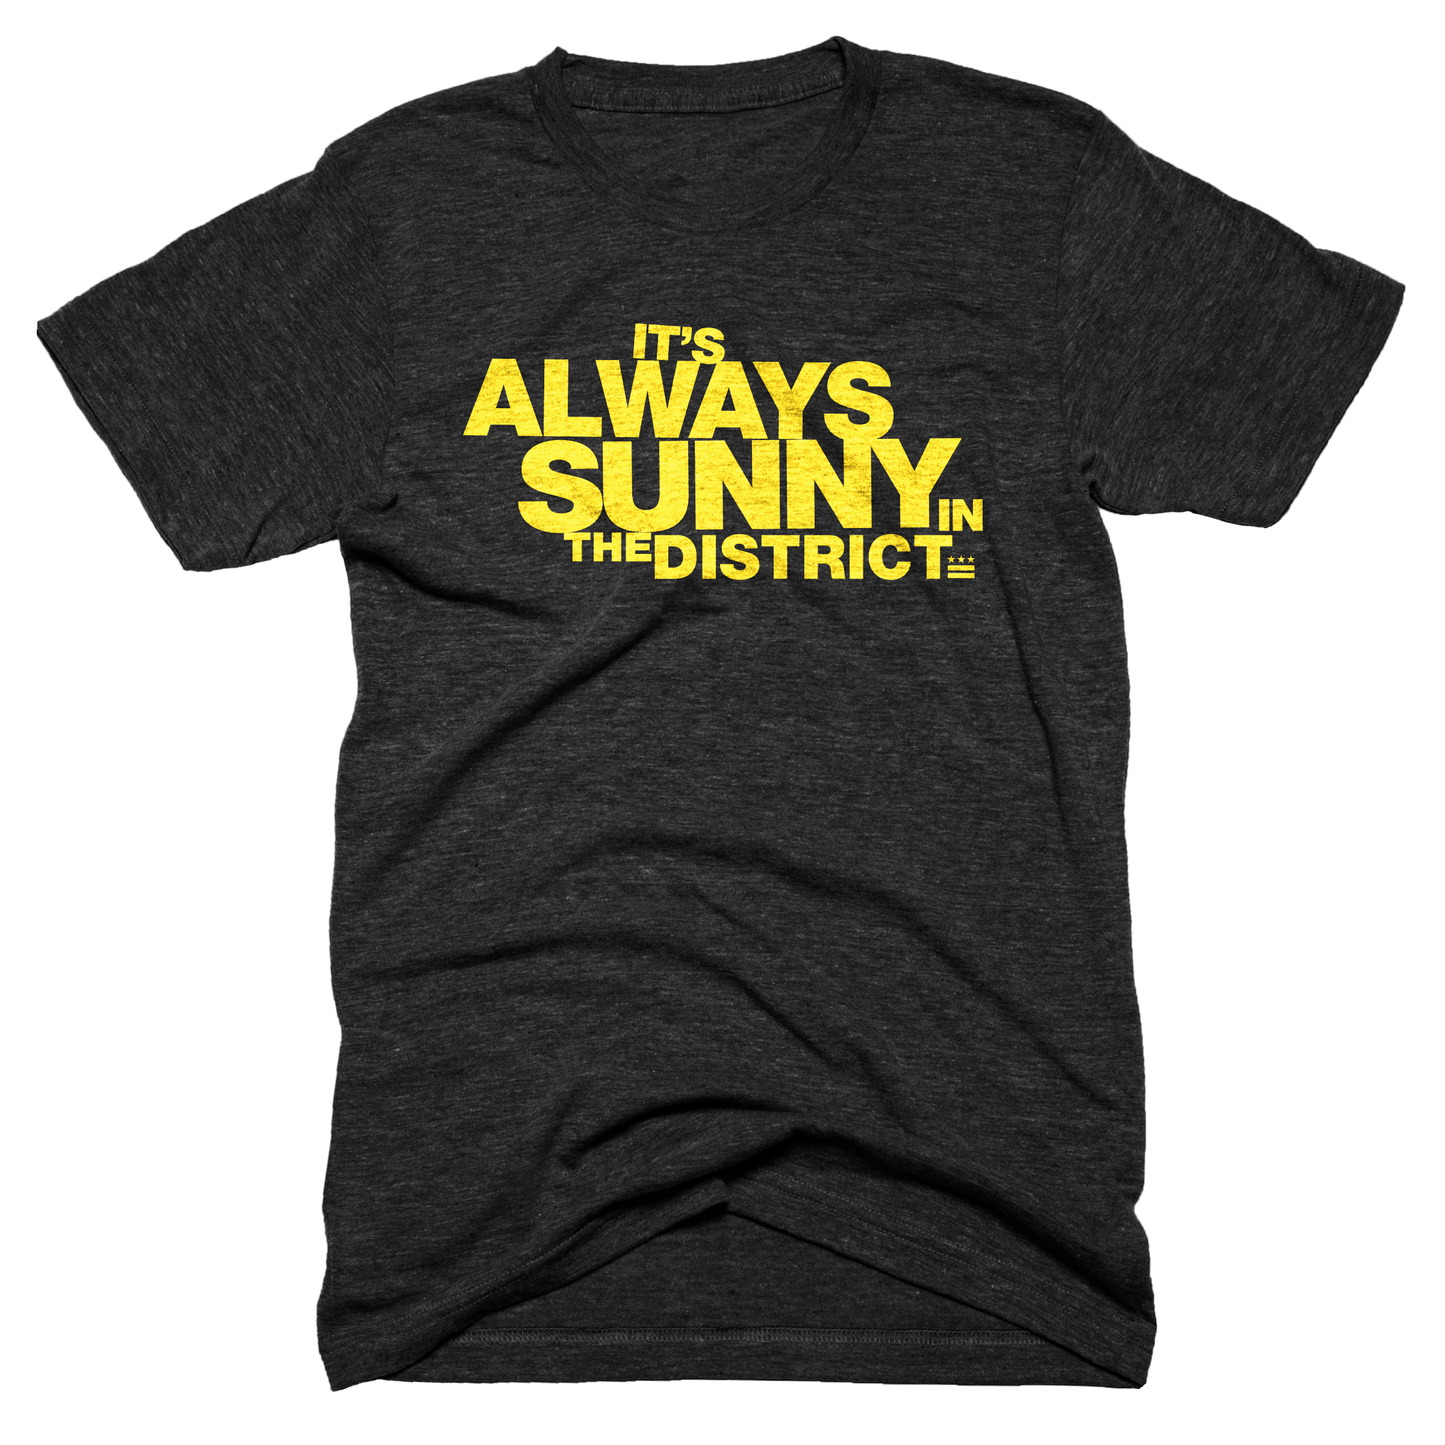 It's Always Sunny In The District T-shirt